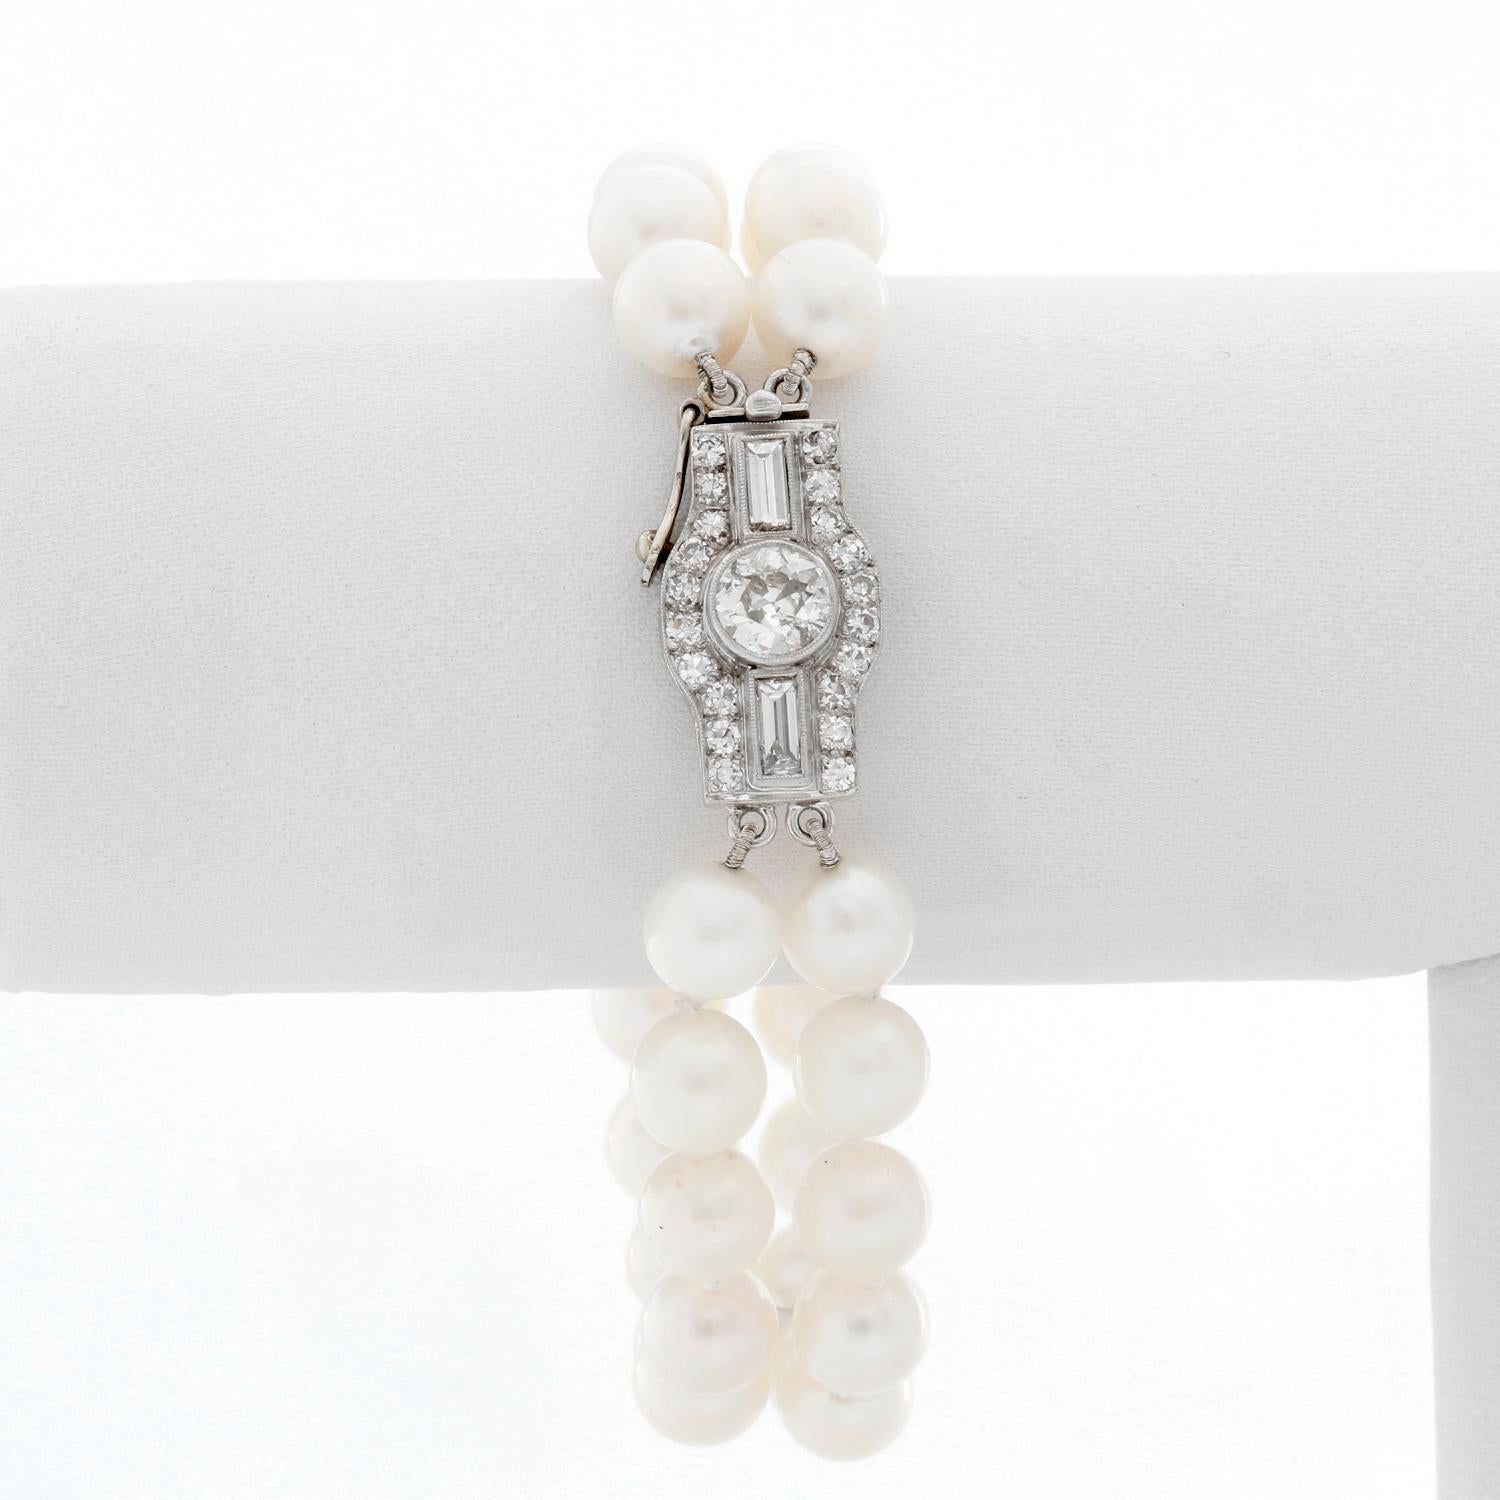 Double Strand Pearl Bracelet With Diamonds - Art deco style bracelet with 2 strands of pearls and an oversized diamond clasp. Bracelet measures approx. 6 1/2 inches with approx. 1 ct of diamonds. Pre-Owned .